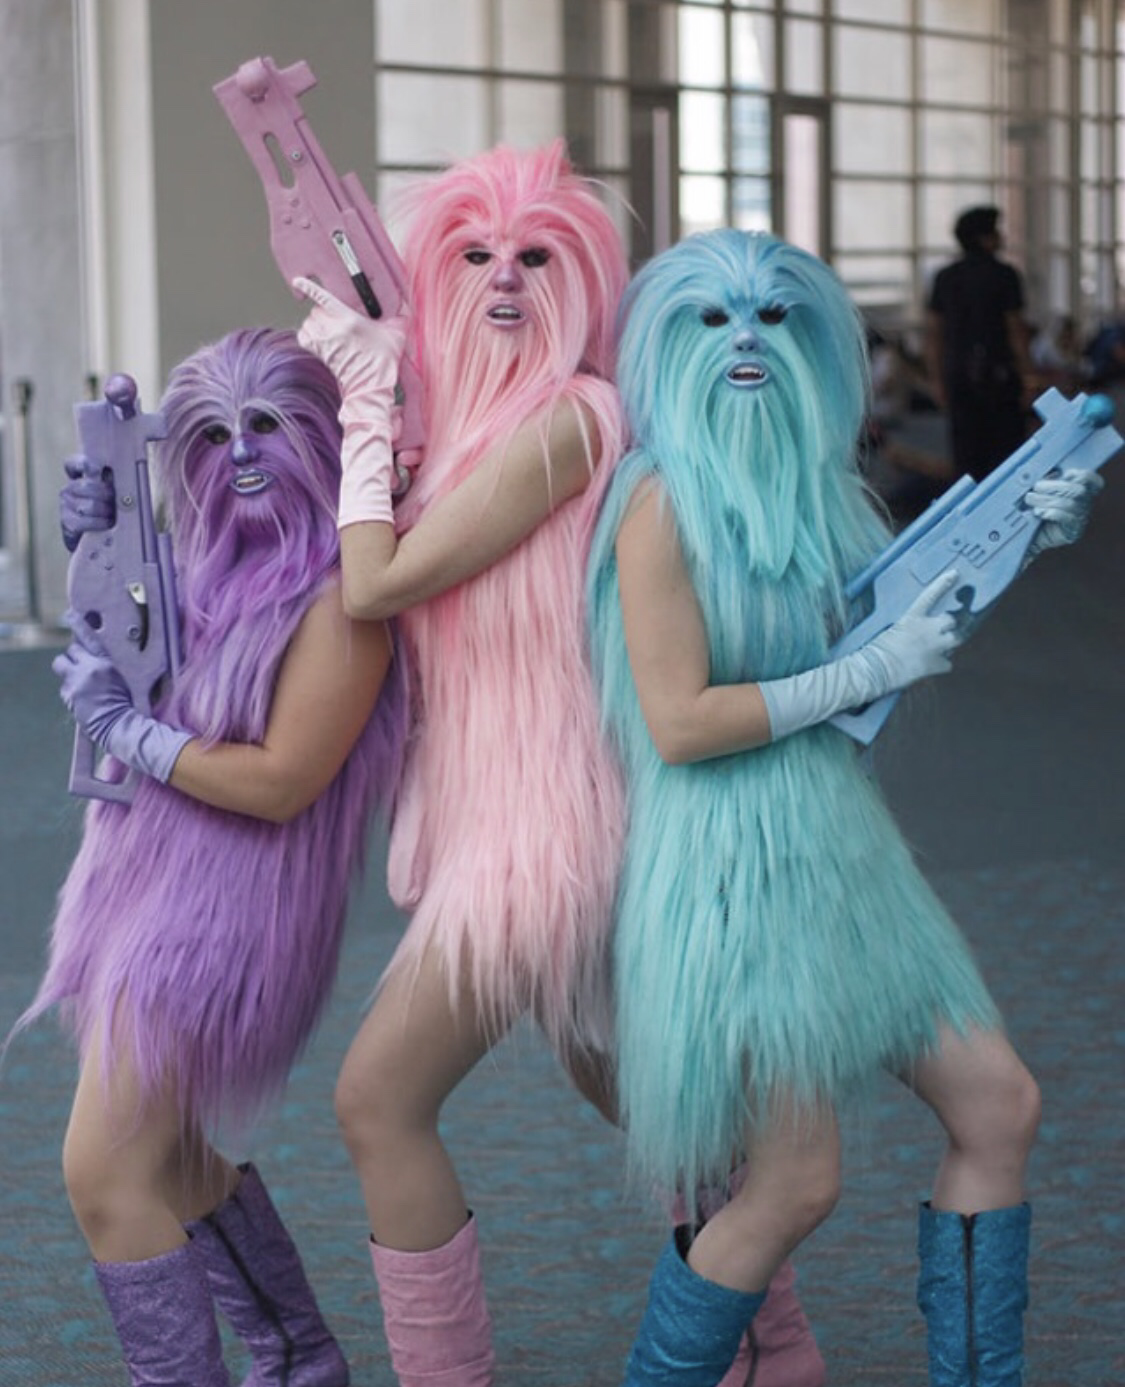 Wookie softcore: Chewie's Angels